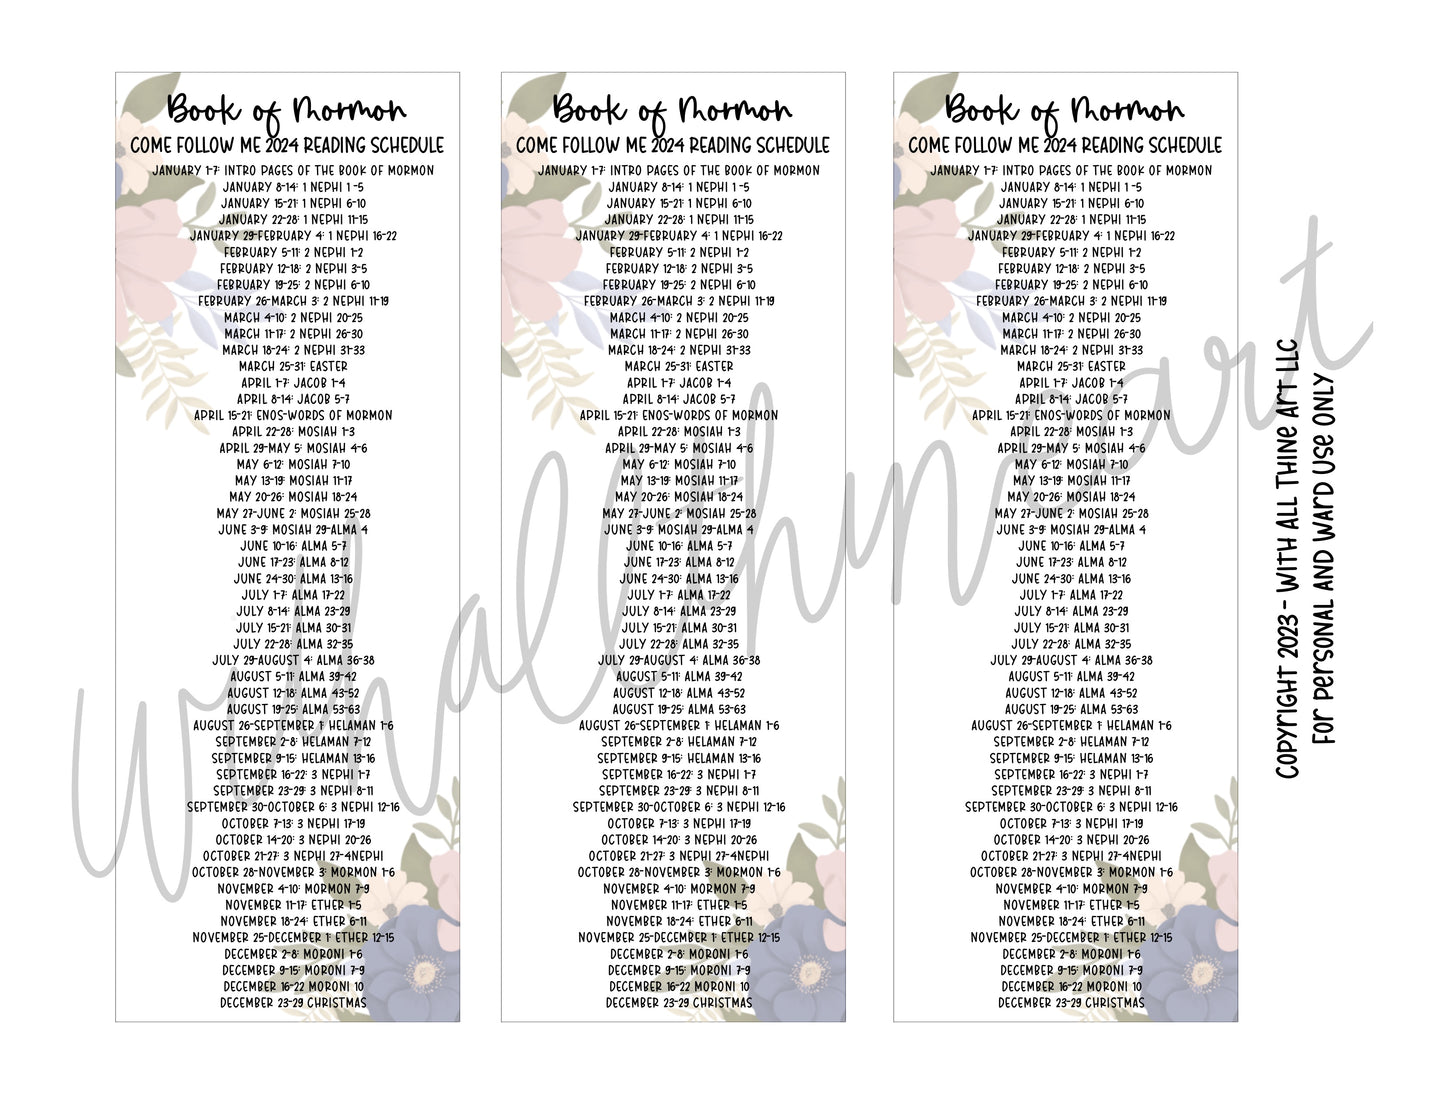 Come Follow Me 2024 Book of Mormon Reading Schedule Bookmarks Floral